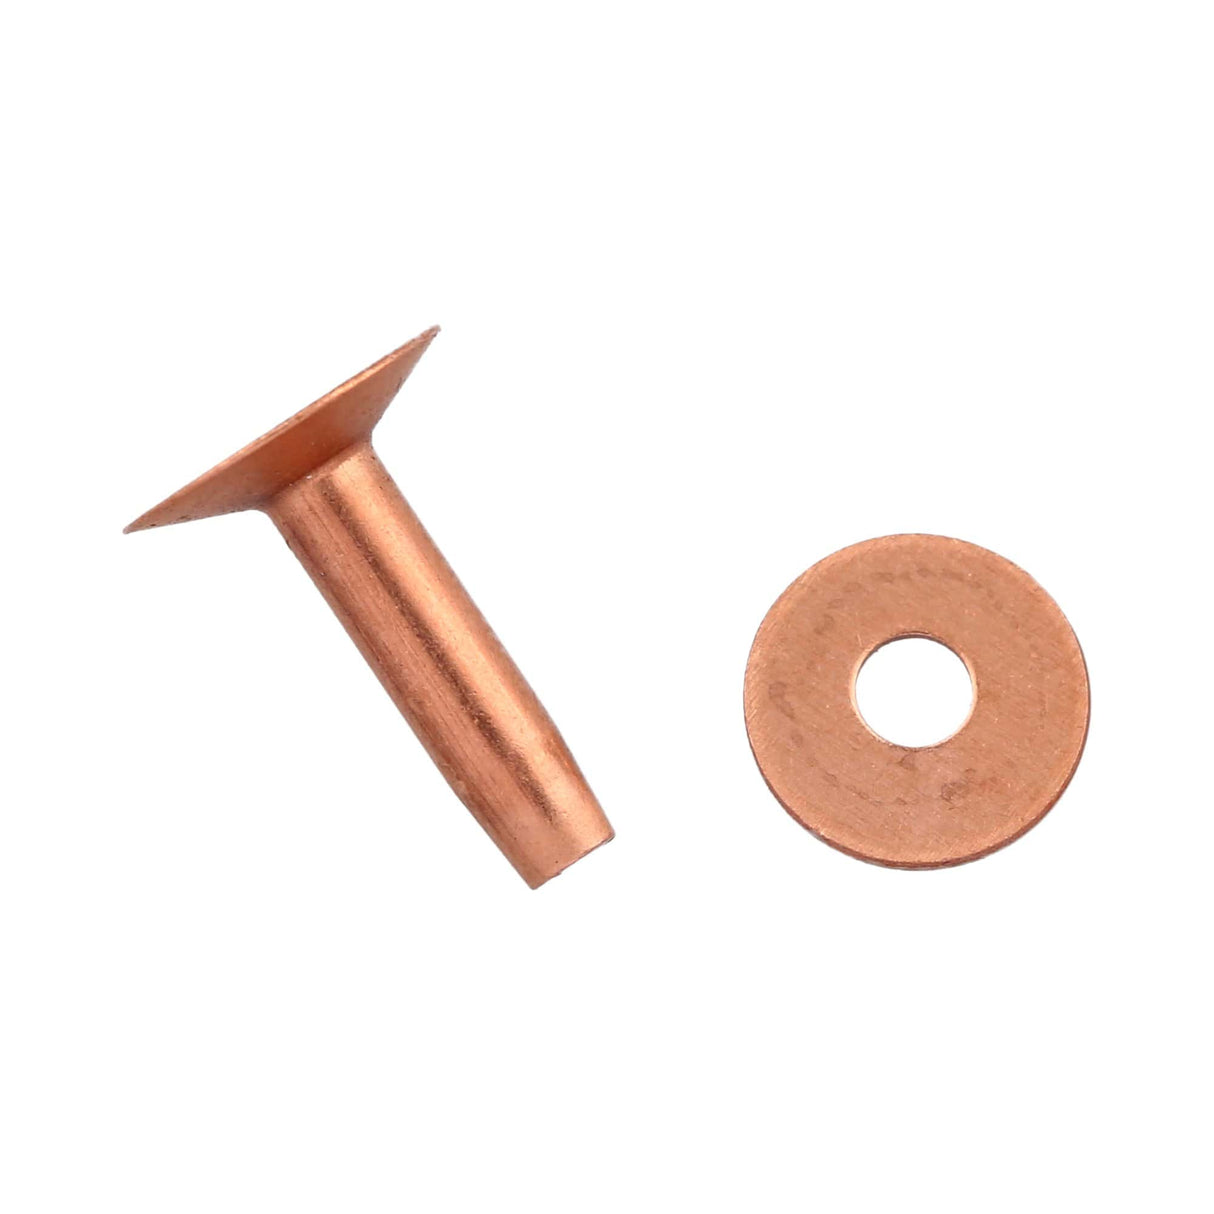 Copper Rivets (My Favorite!): Tools and Technique for Success